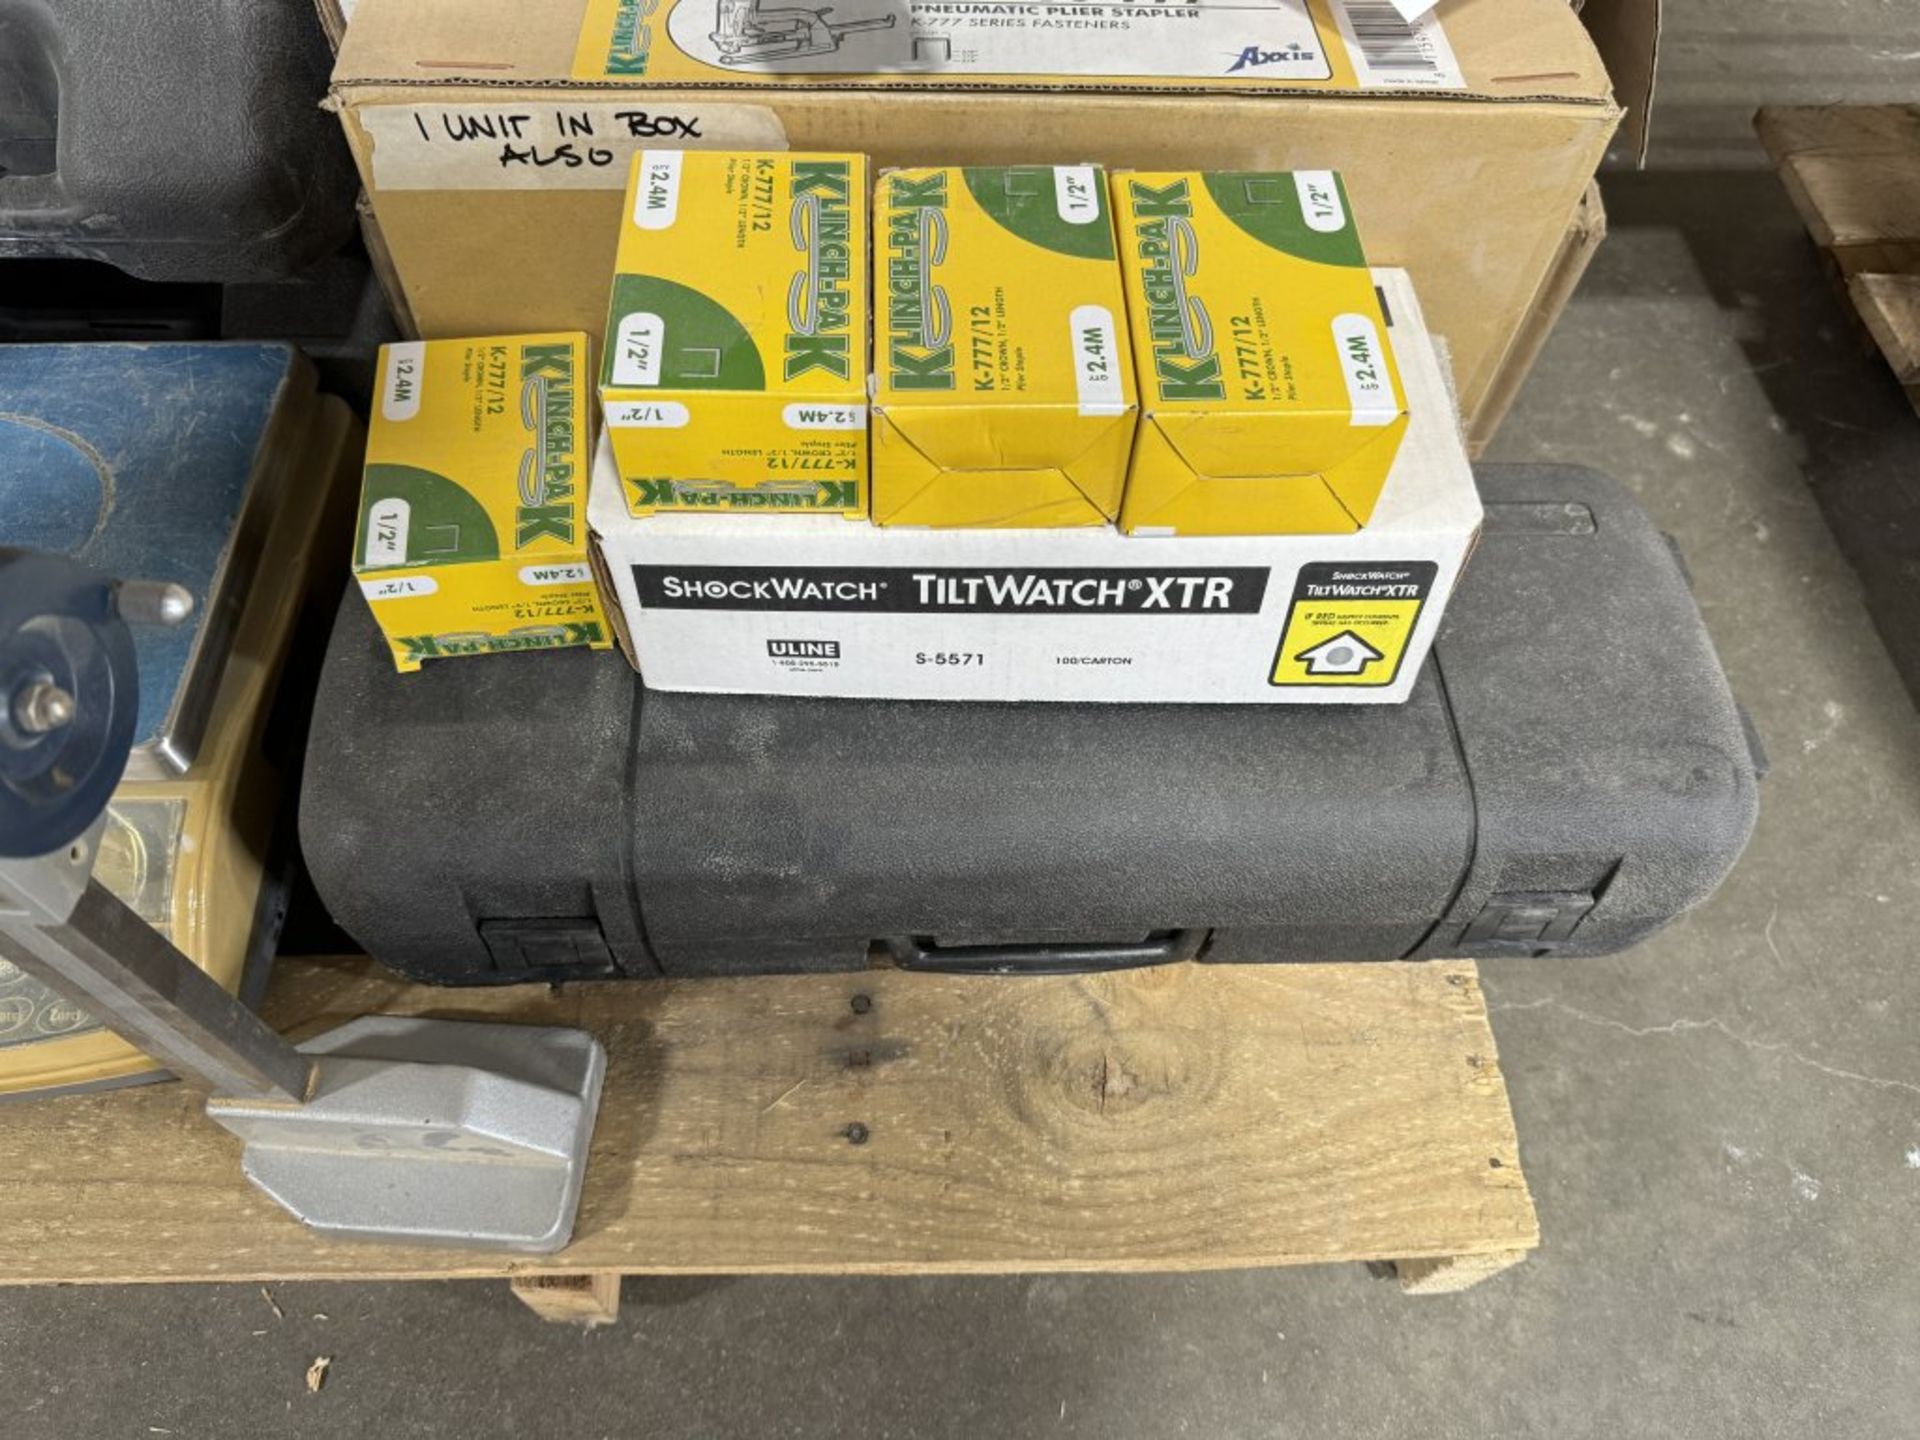 PALLET OF ASSORTED SCALES, STAPLES, (2) STAPLE GUNS, EMPTY CASES, ETC. - Image 5 of 6